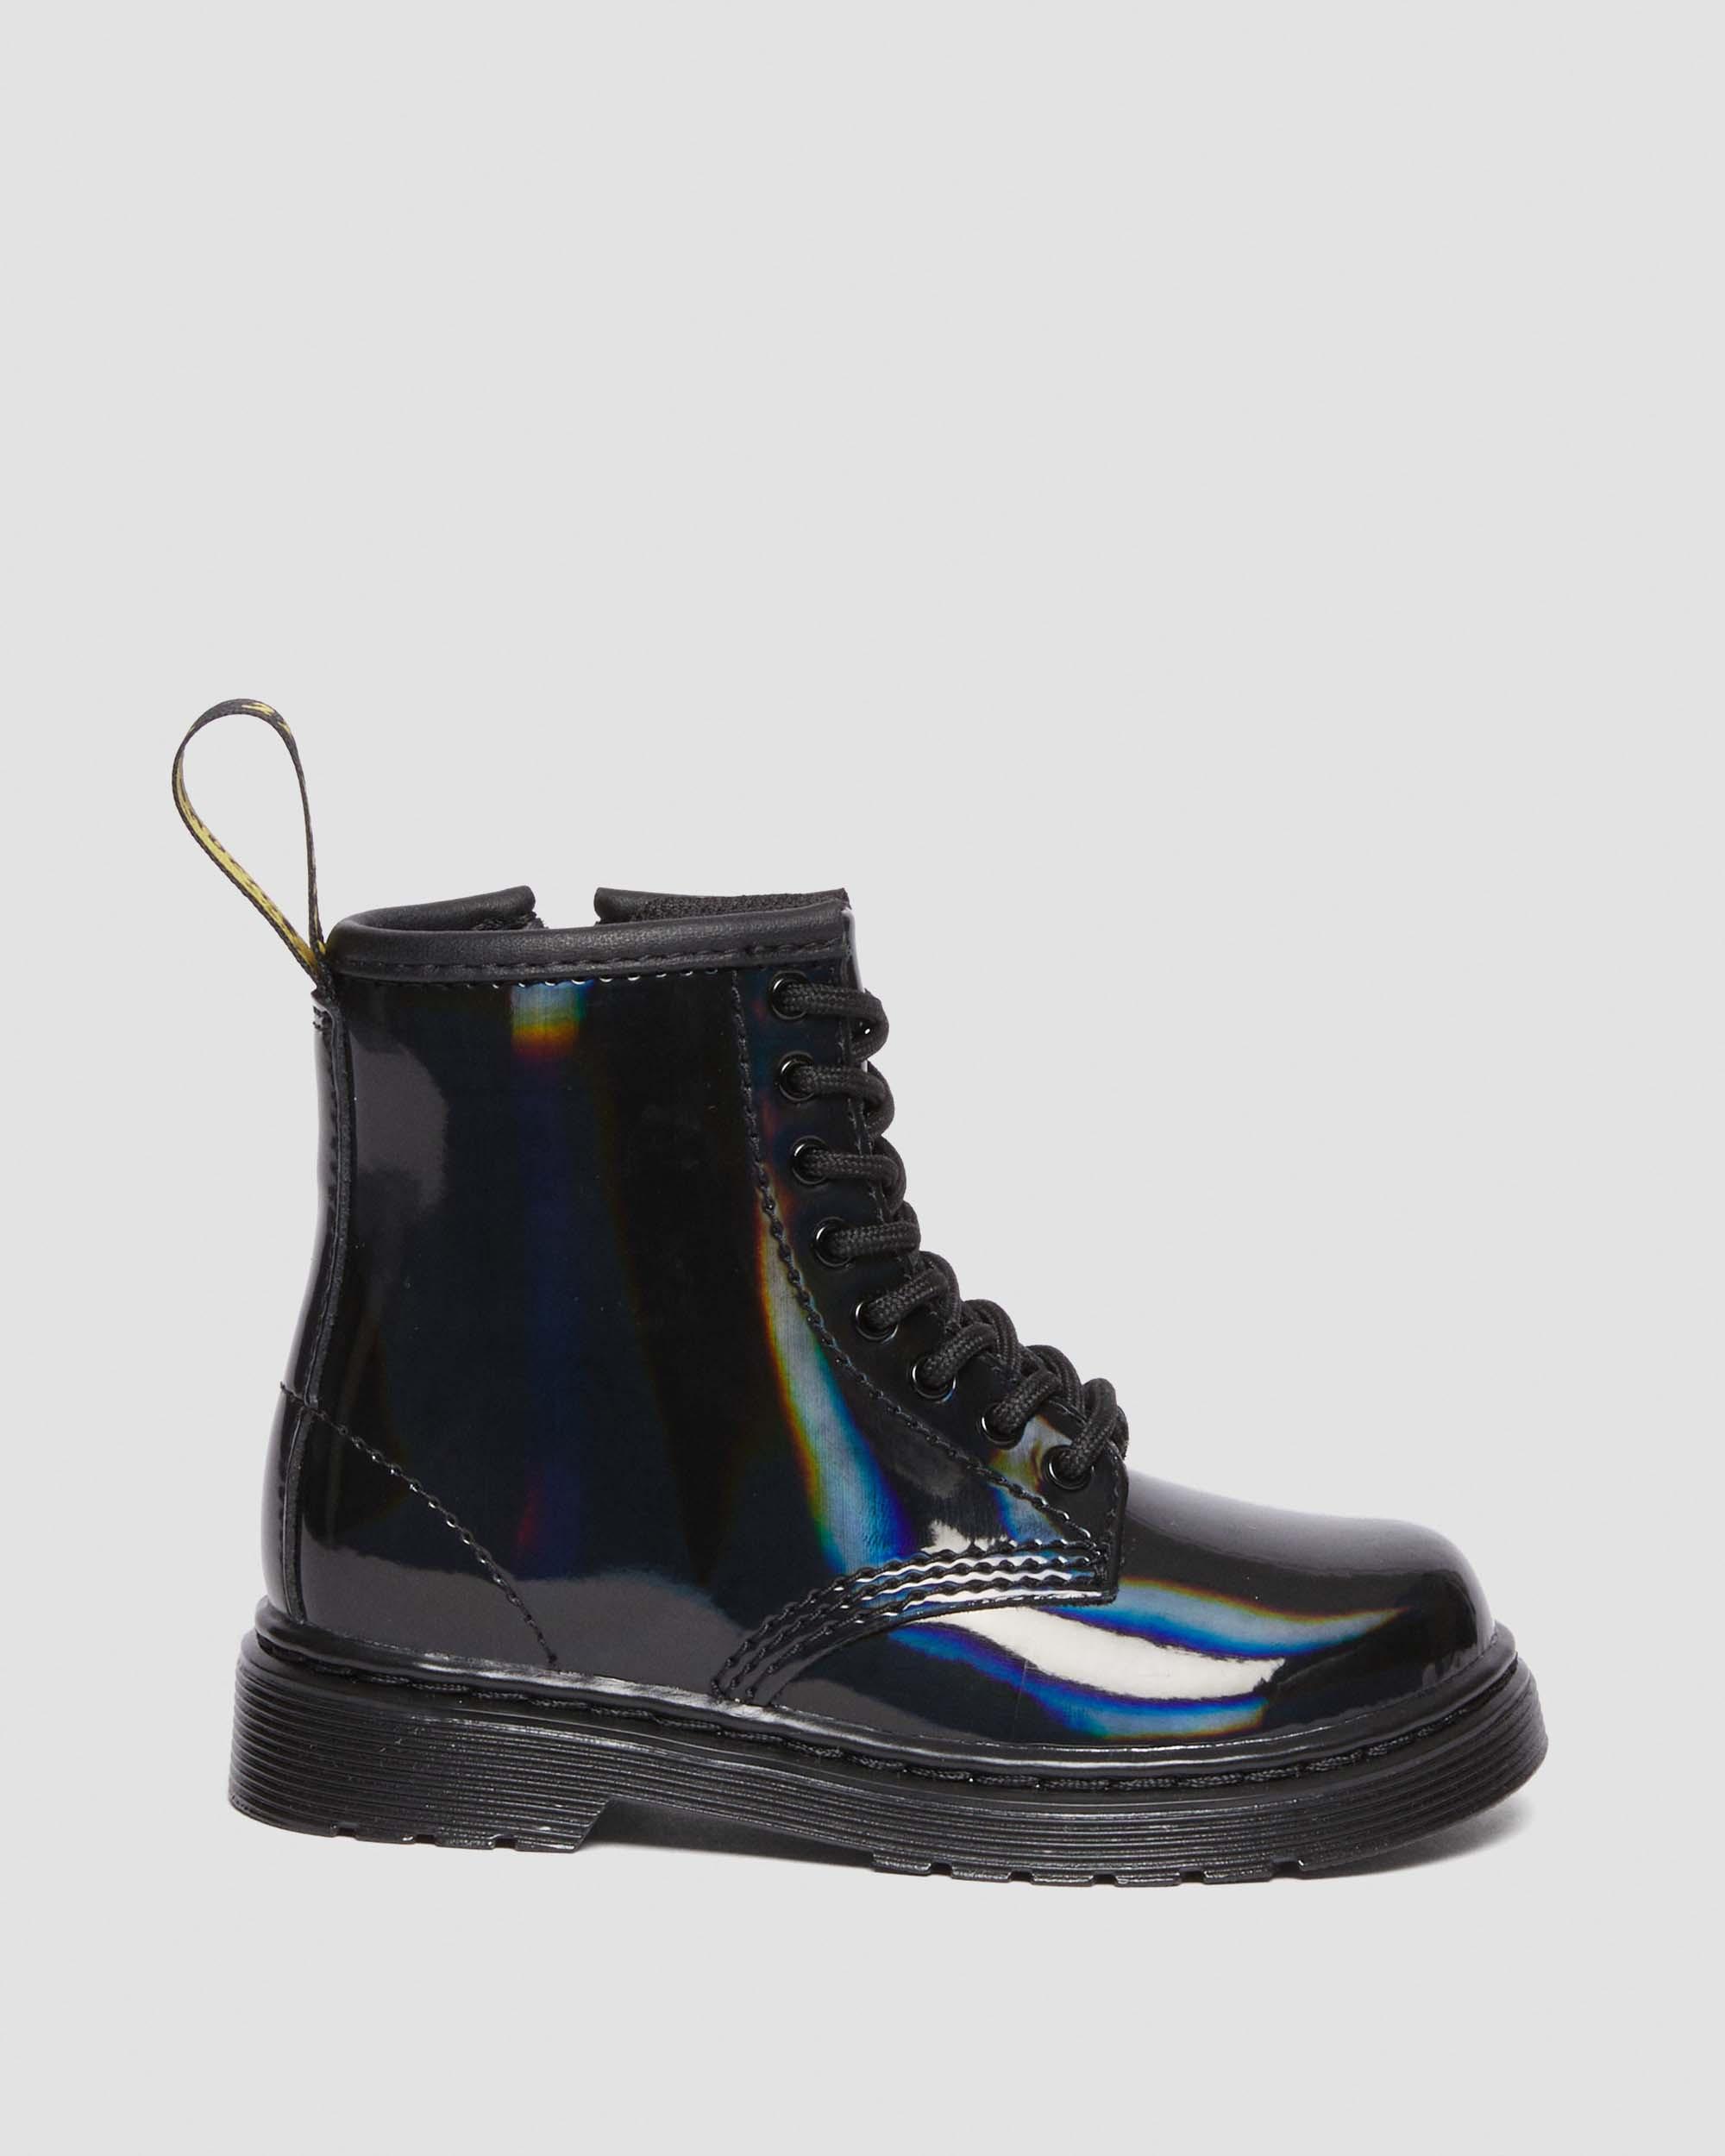 Toddler 1460 Rainbow Leather Lace Up BootsToddler 1460 Rainbow Leather Lace Up Boots Dr. Martens